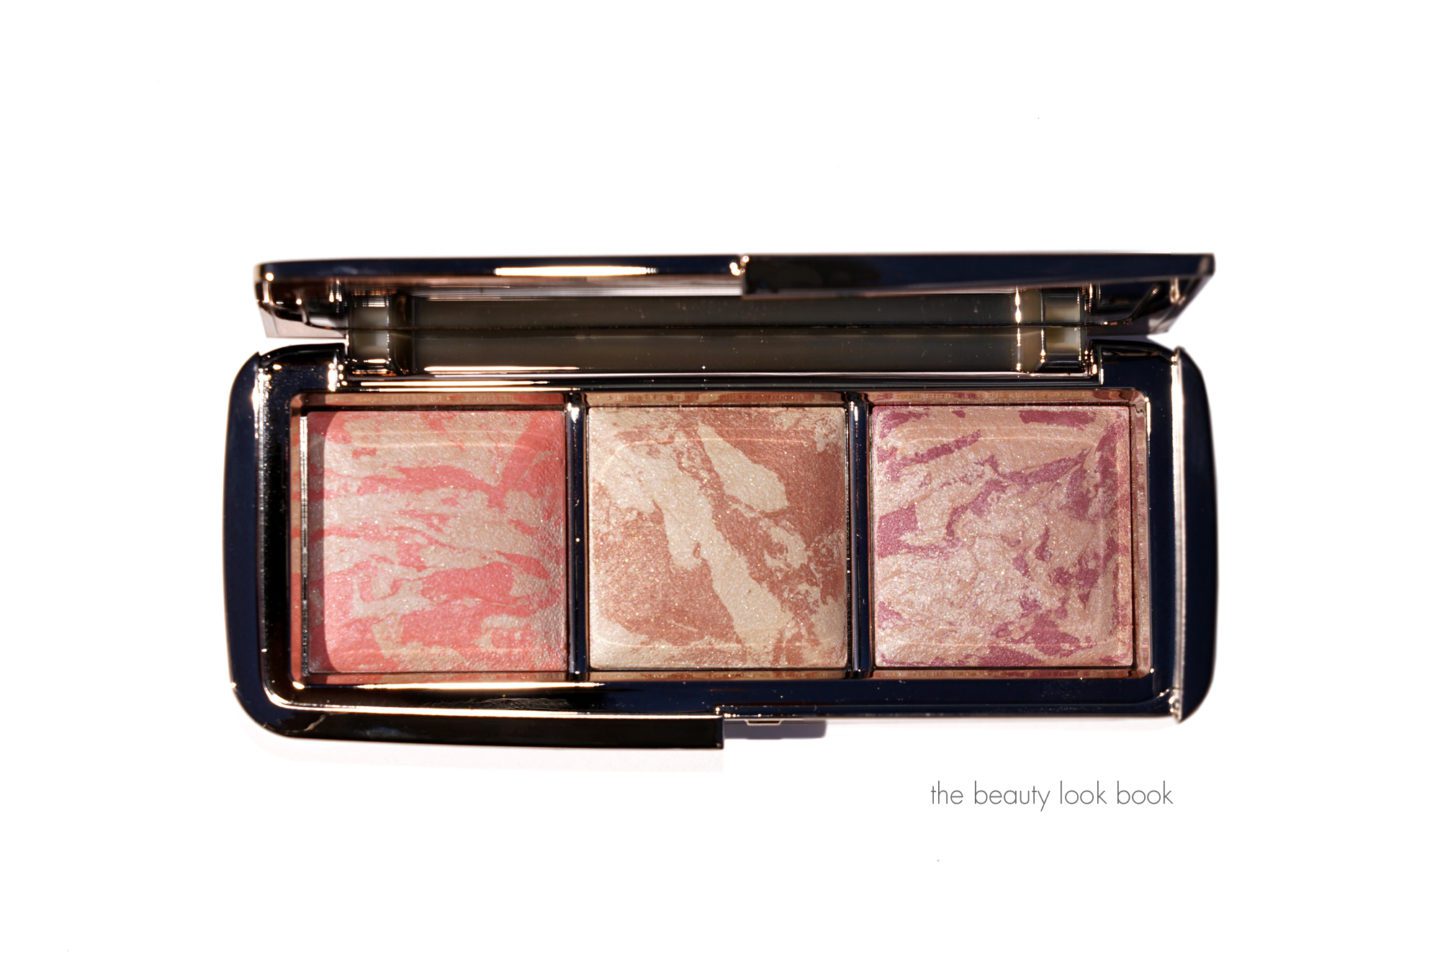 Hourglass Ambient Strobe Blush Palette reviewed from the Sabrina of The Beauty Look Book